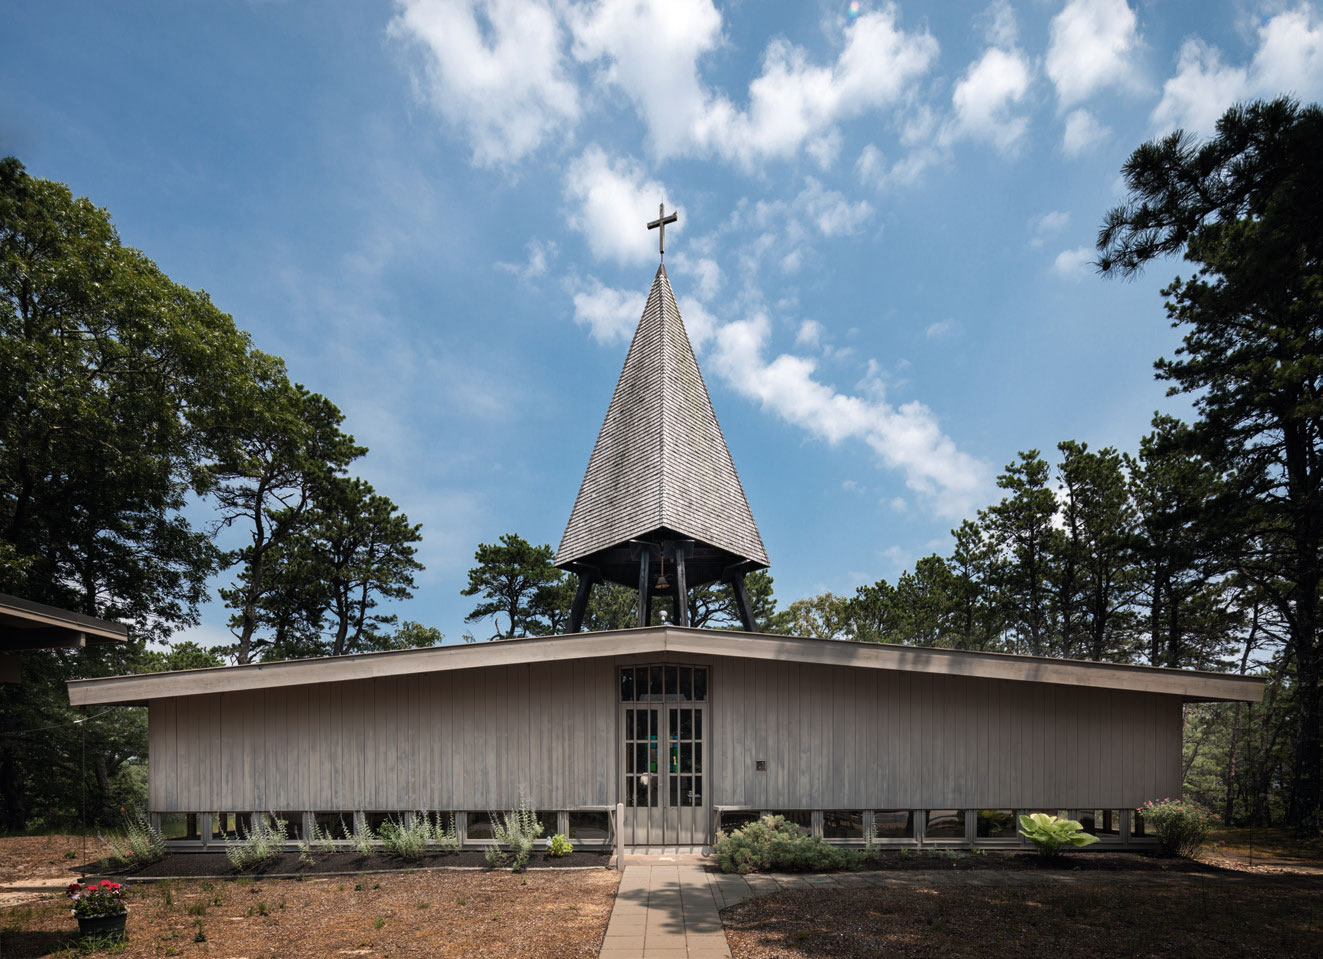 The Chapel of St. James the Fisherman in Wellfleet, Massachusetts, by Olav Hammarstrom. As featured in Mid-Century Modern Architecture Travel Guide: East Coast USA. All photographs by Darren Bradley